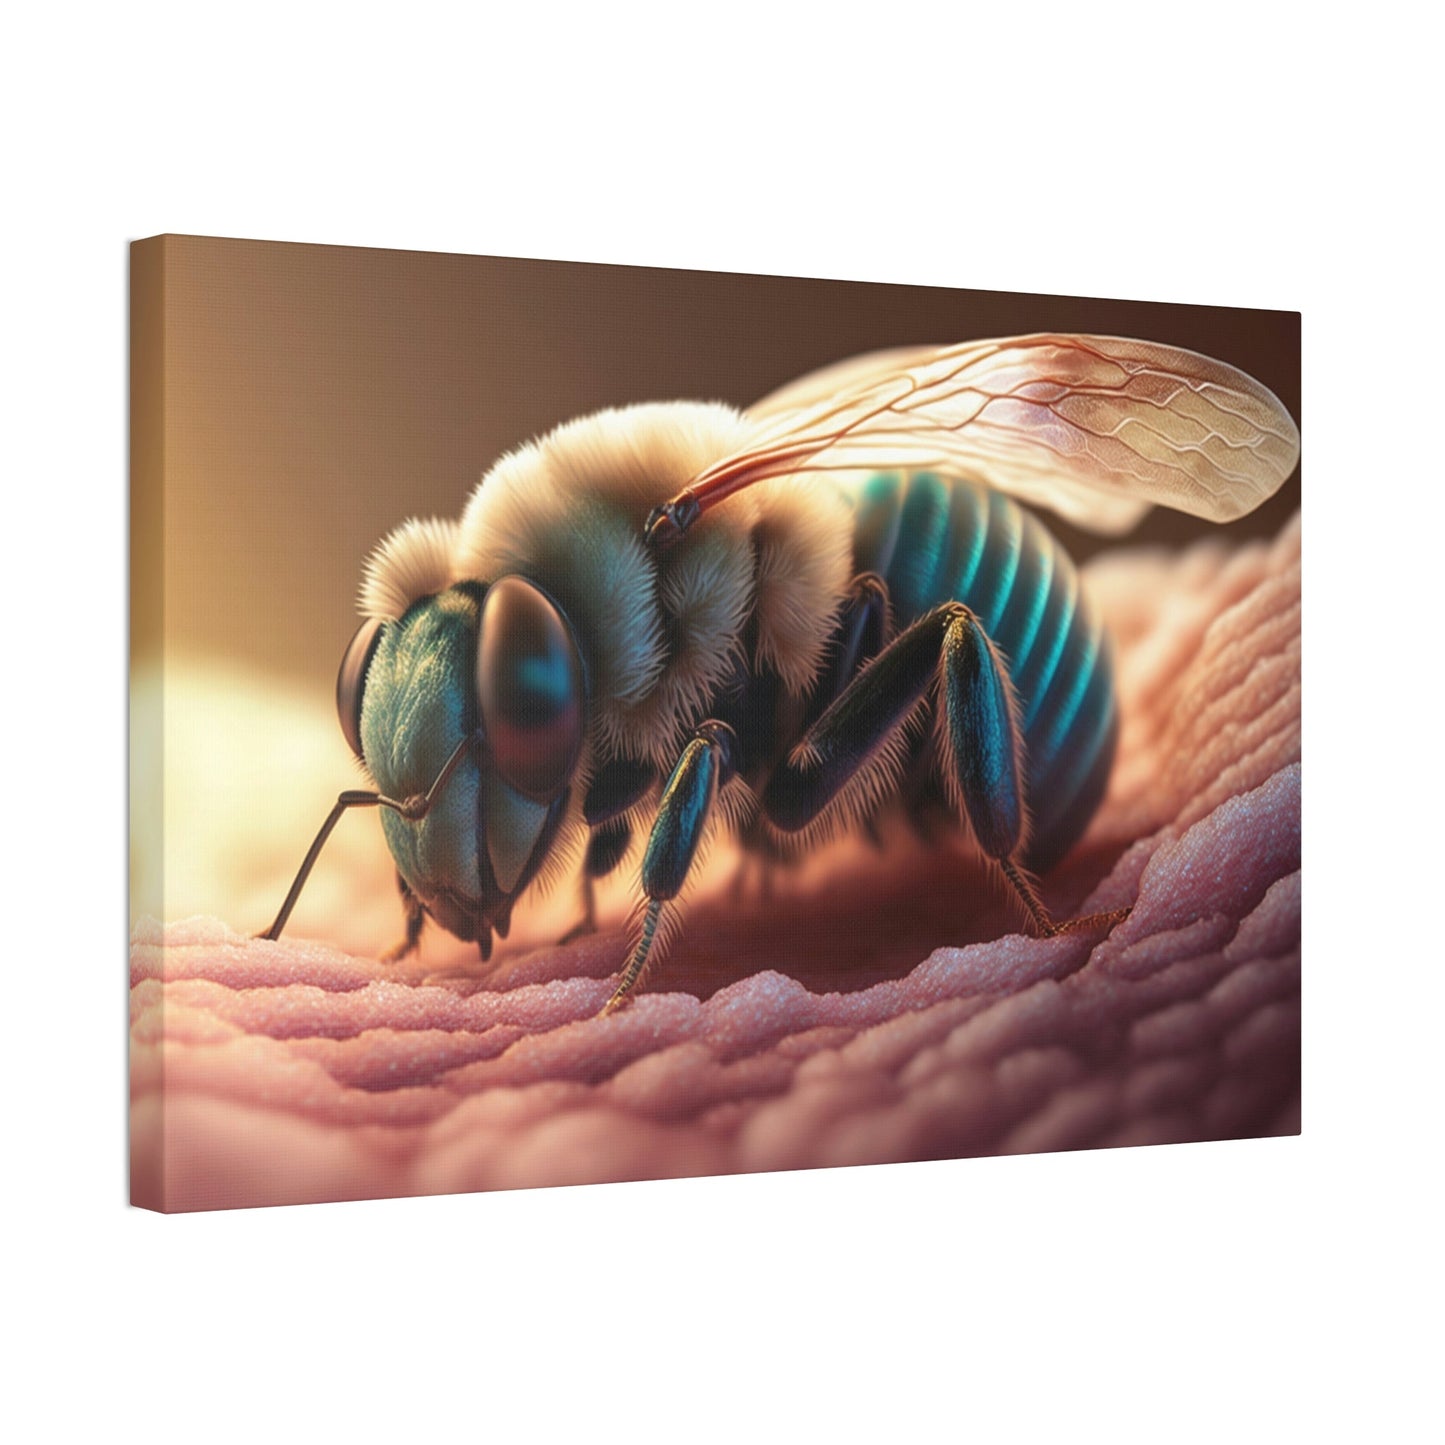 The Art of Pollination: A Print on Canvas & Poster of a Bee and a Flower in Harmony